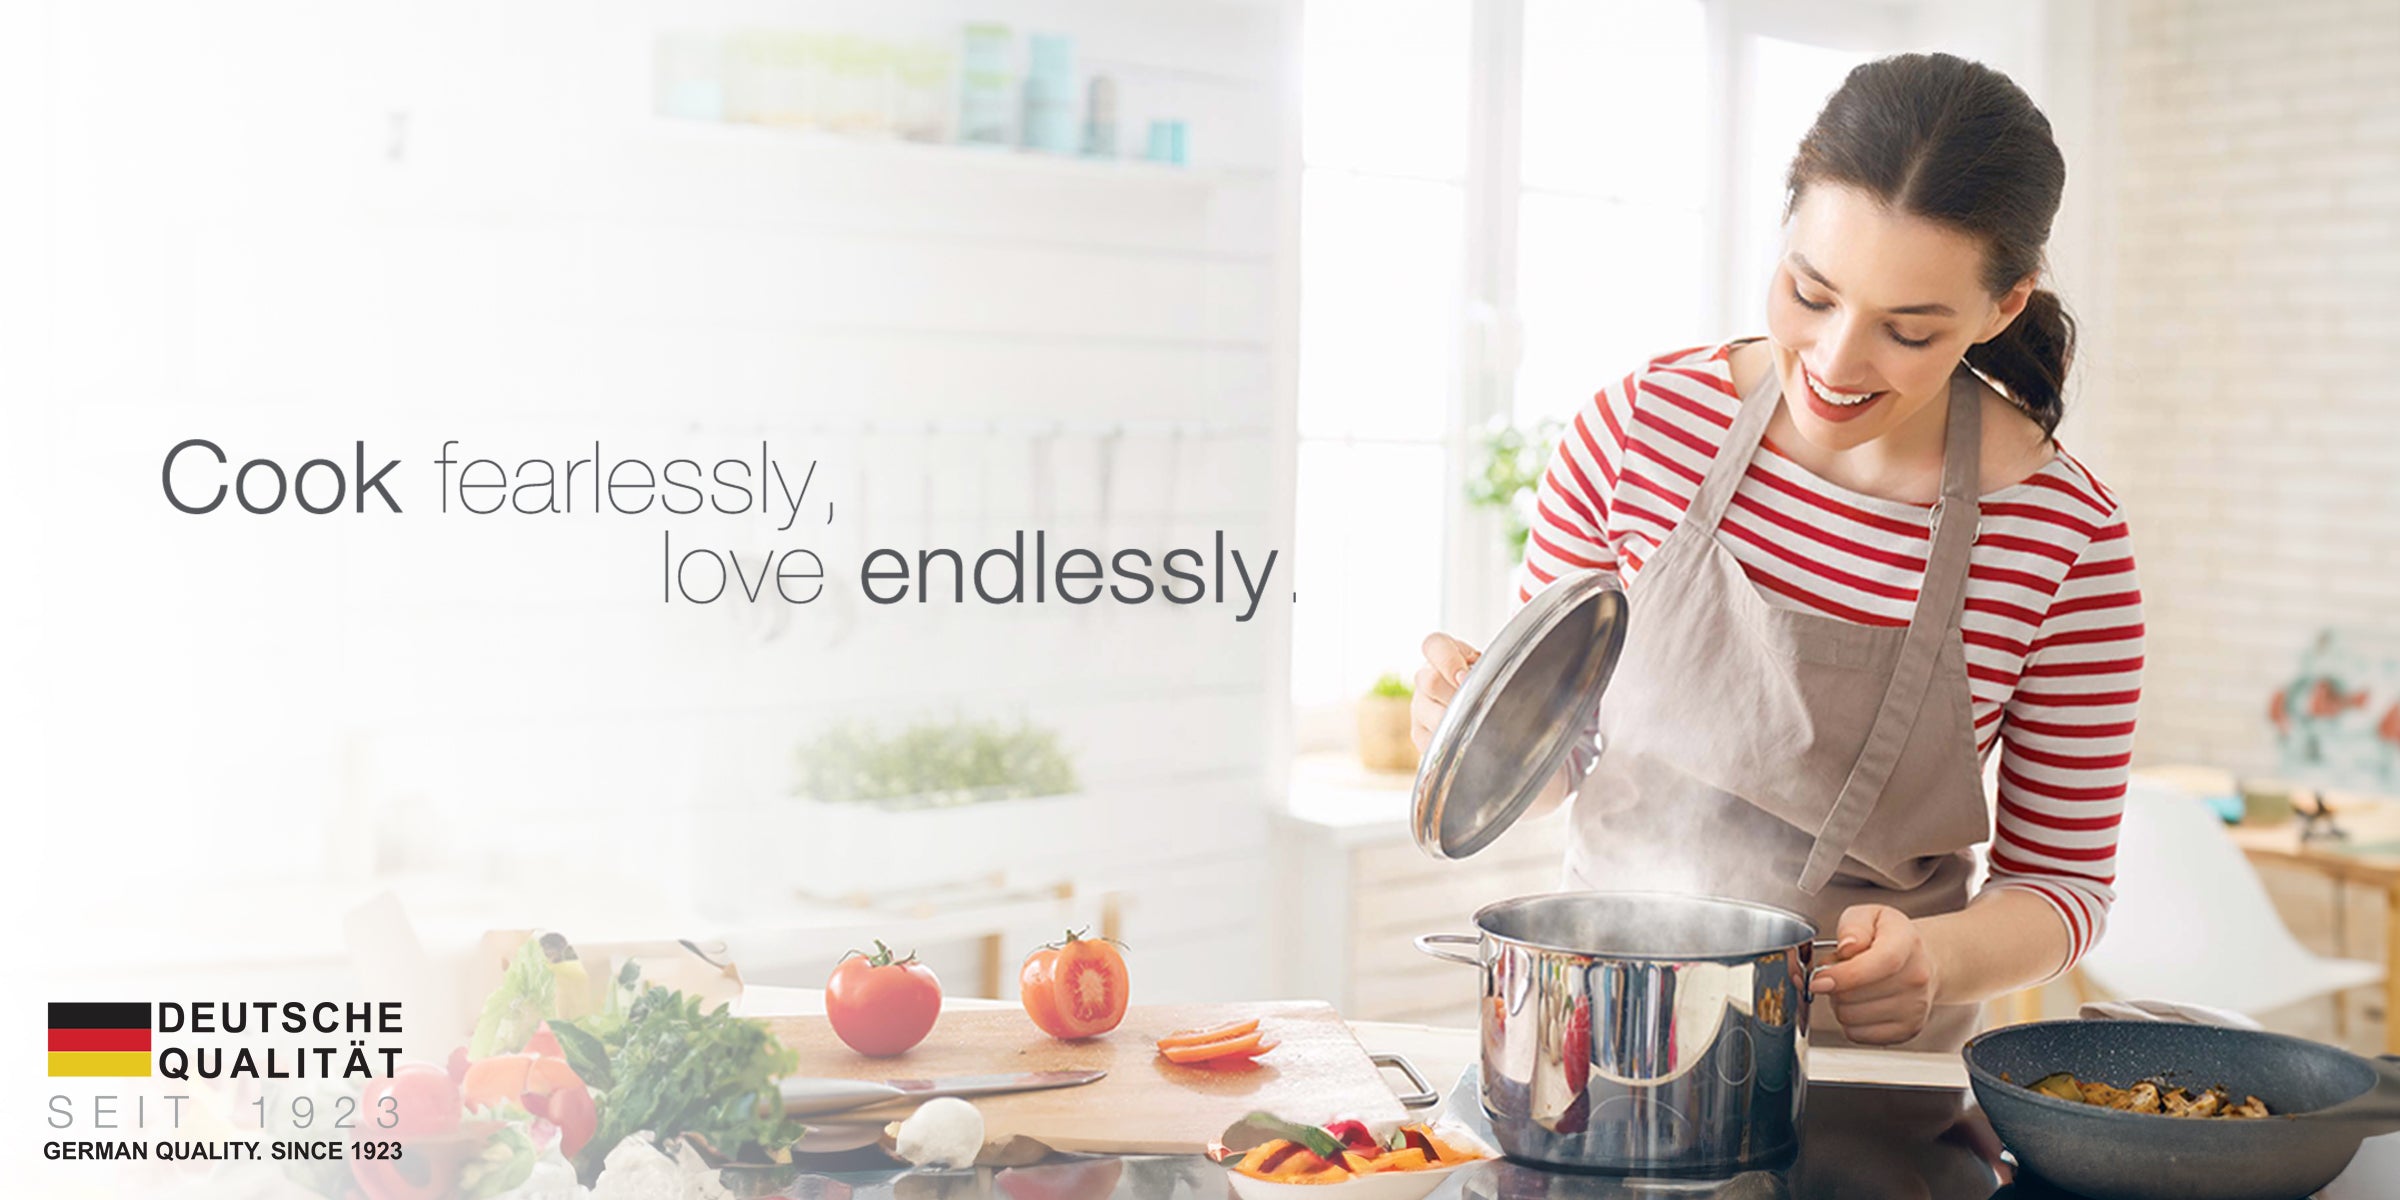 Cook fearlessly, love endlessly